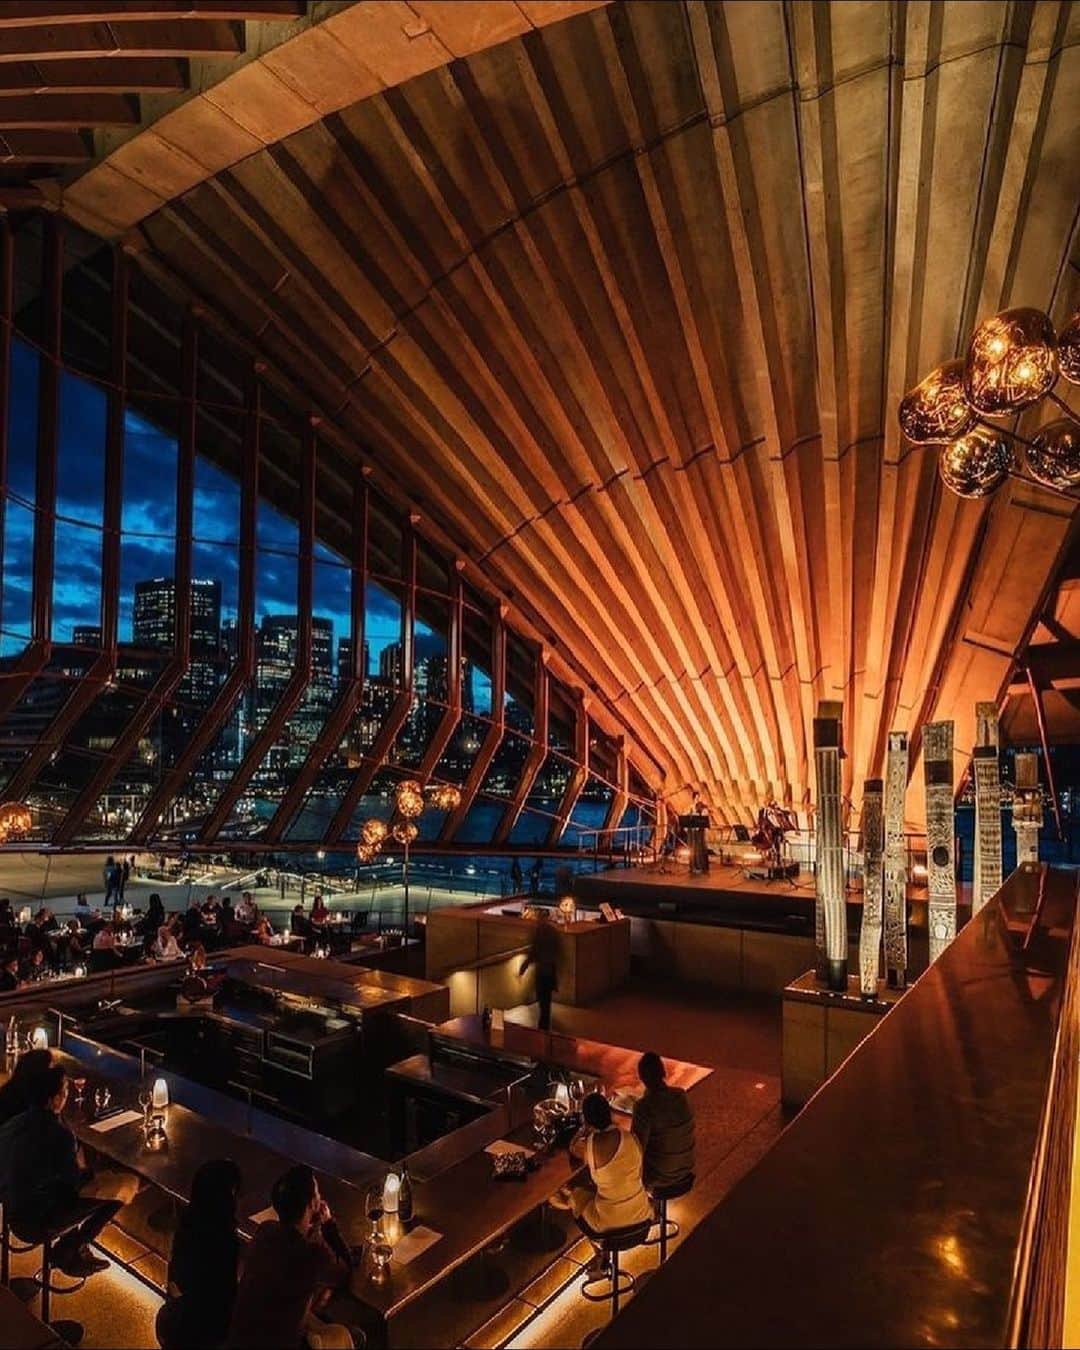 Australiaのインスタグラム：「It's not every day you get to dine beneath the sails of the @sydneyoperahouse 🤩 Step inside @bennelong_sydney, the acclaimed @sydney restaurant by @chefpetergilmore. Overlooking Tubowgule (#SydneyHarbour) with unbeatable views of the #SydneyHarbourBridge, this hatted restaurant at the #SydneyOperaHouse has several semi-private dining spaces for groups of 10-28 guests. Alternatively, the whole venue can be hired exclusively for up to 100 guests seated or 300 for a cocktail-style event.   #ComeAndSayGday #SeeAustralia #MeetInAus #FeelNSW #FeelNewSydney  ID: The interior of a restaurant. Dinners enjoy their meals under warm, moody lighting. Angled walls arch up towards the ceiling, as glass windows show a peak of a city skyline.」